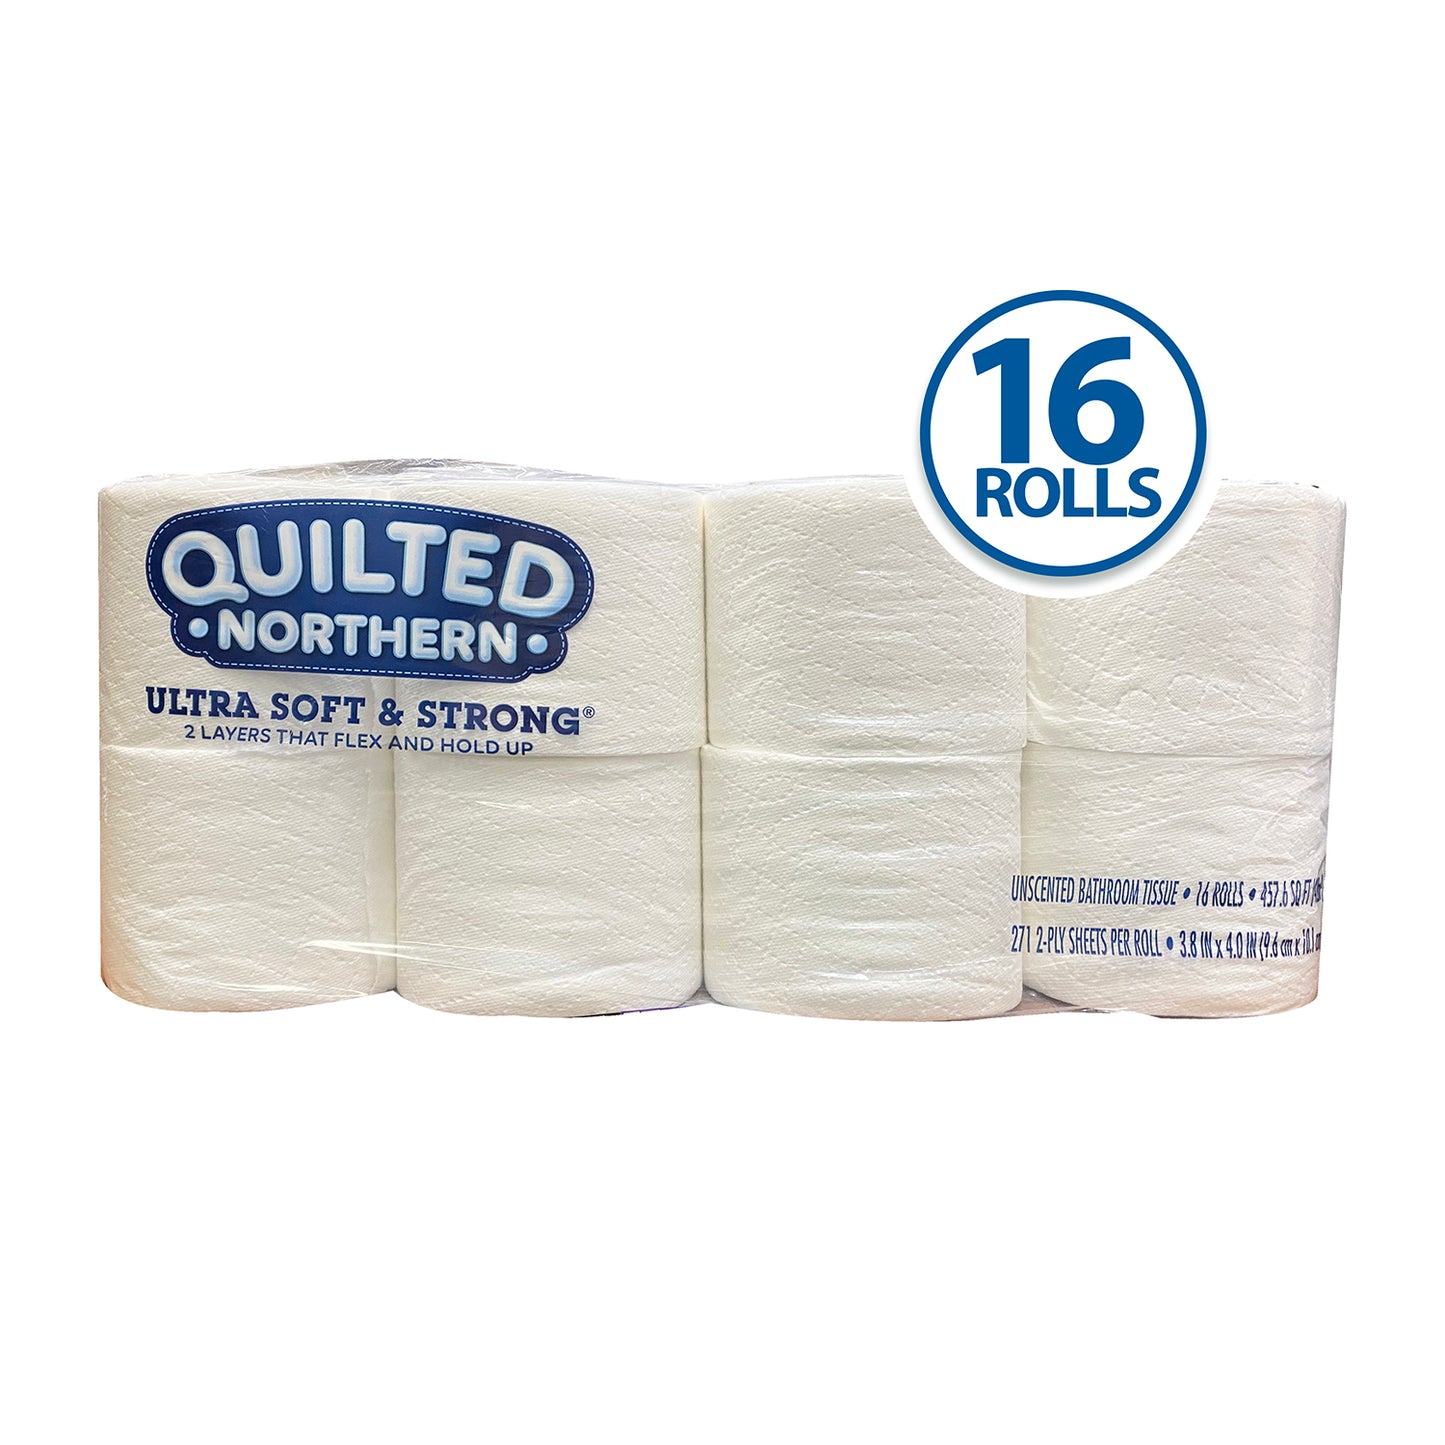 Quilted Northern Ultra Soft & Strong Toilet Paper 16 Rolls